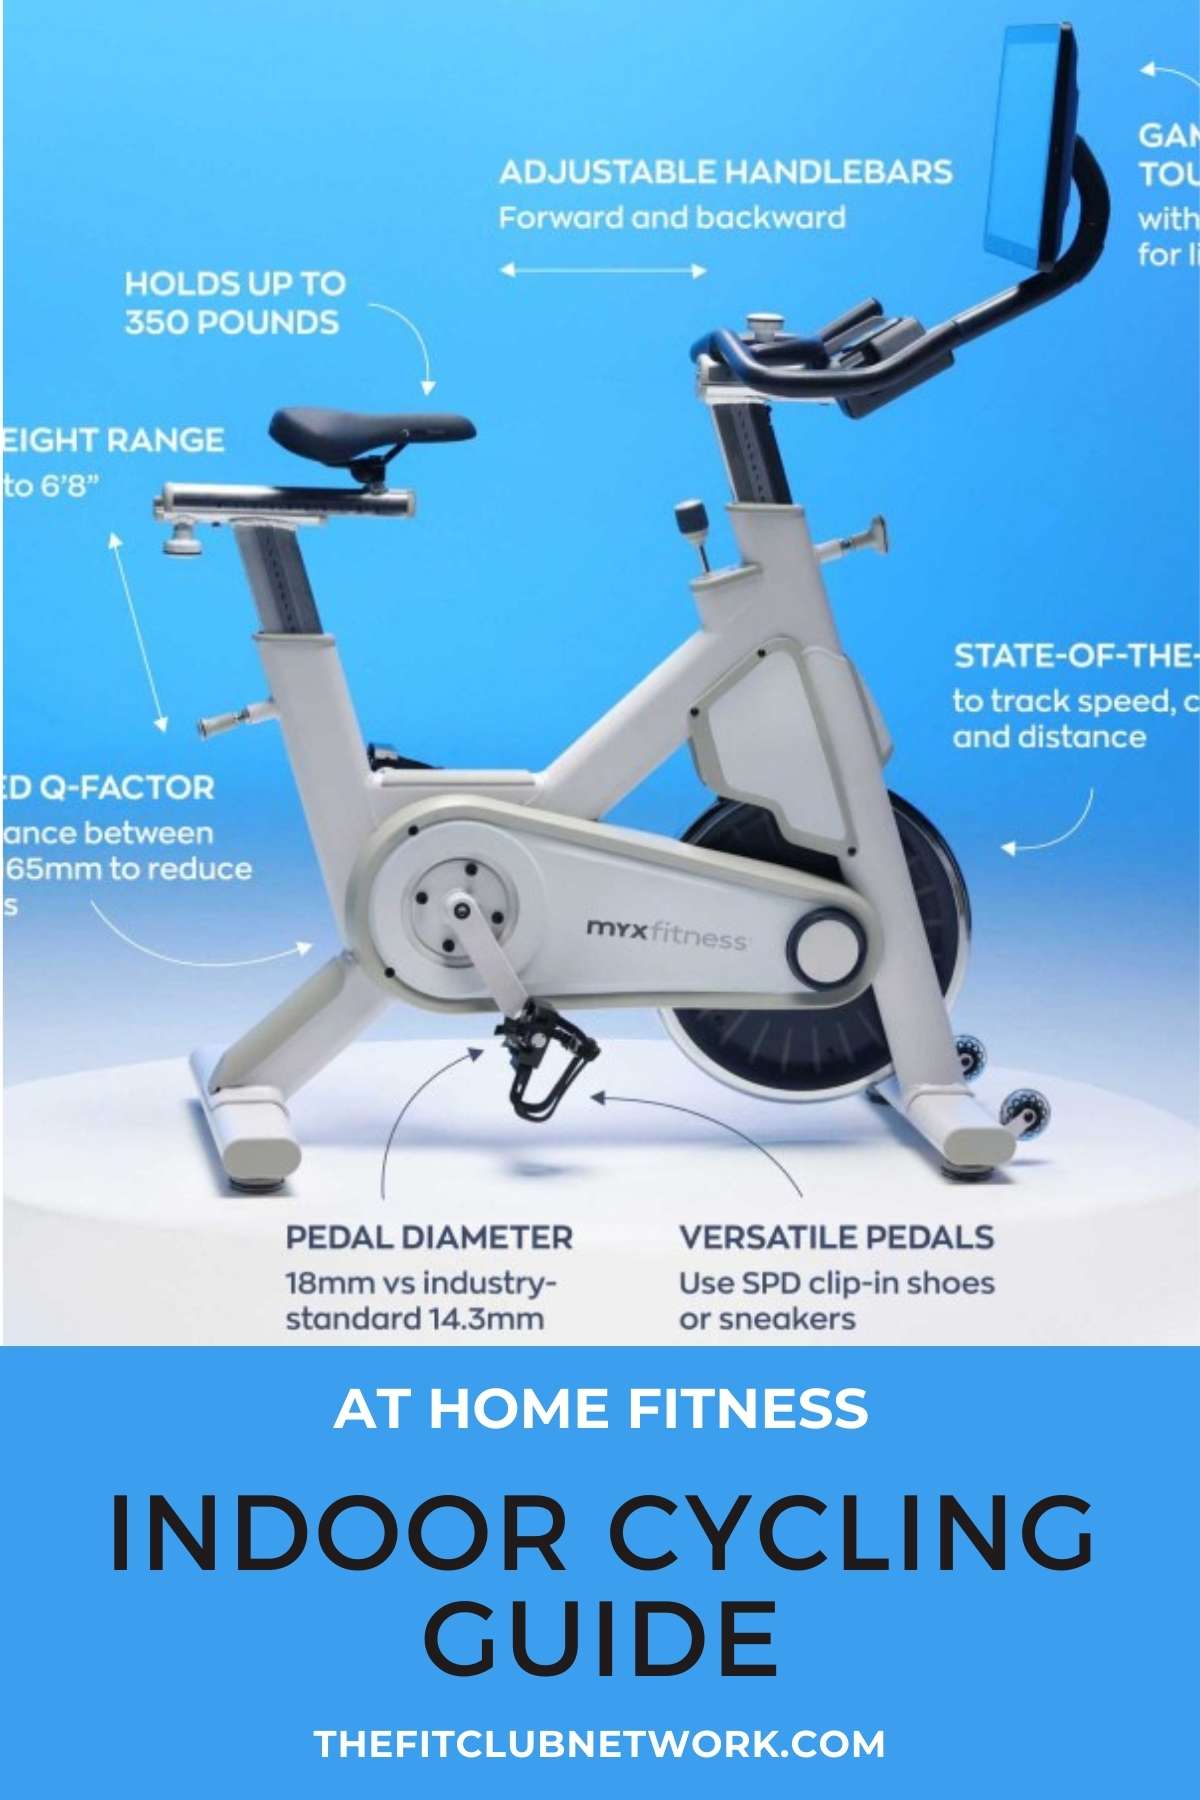 New to Indoor Cycling? Here’s an Indoor Cycling Guide